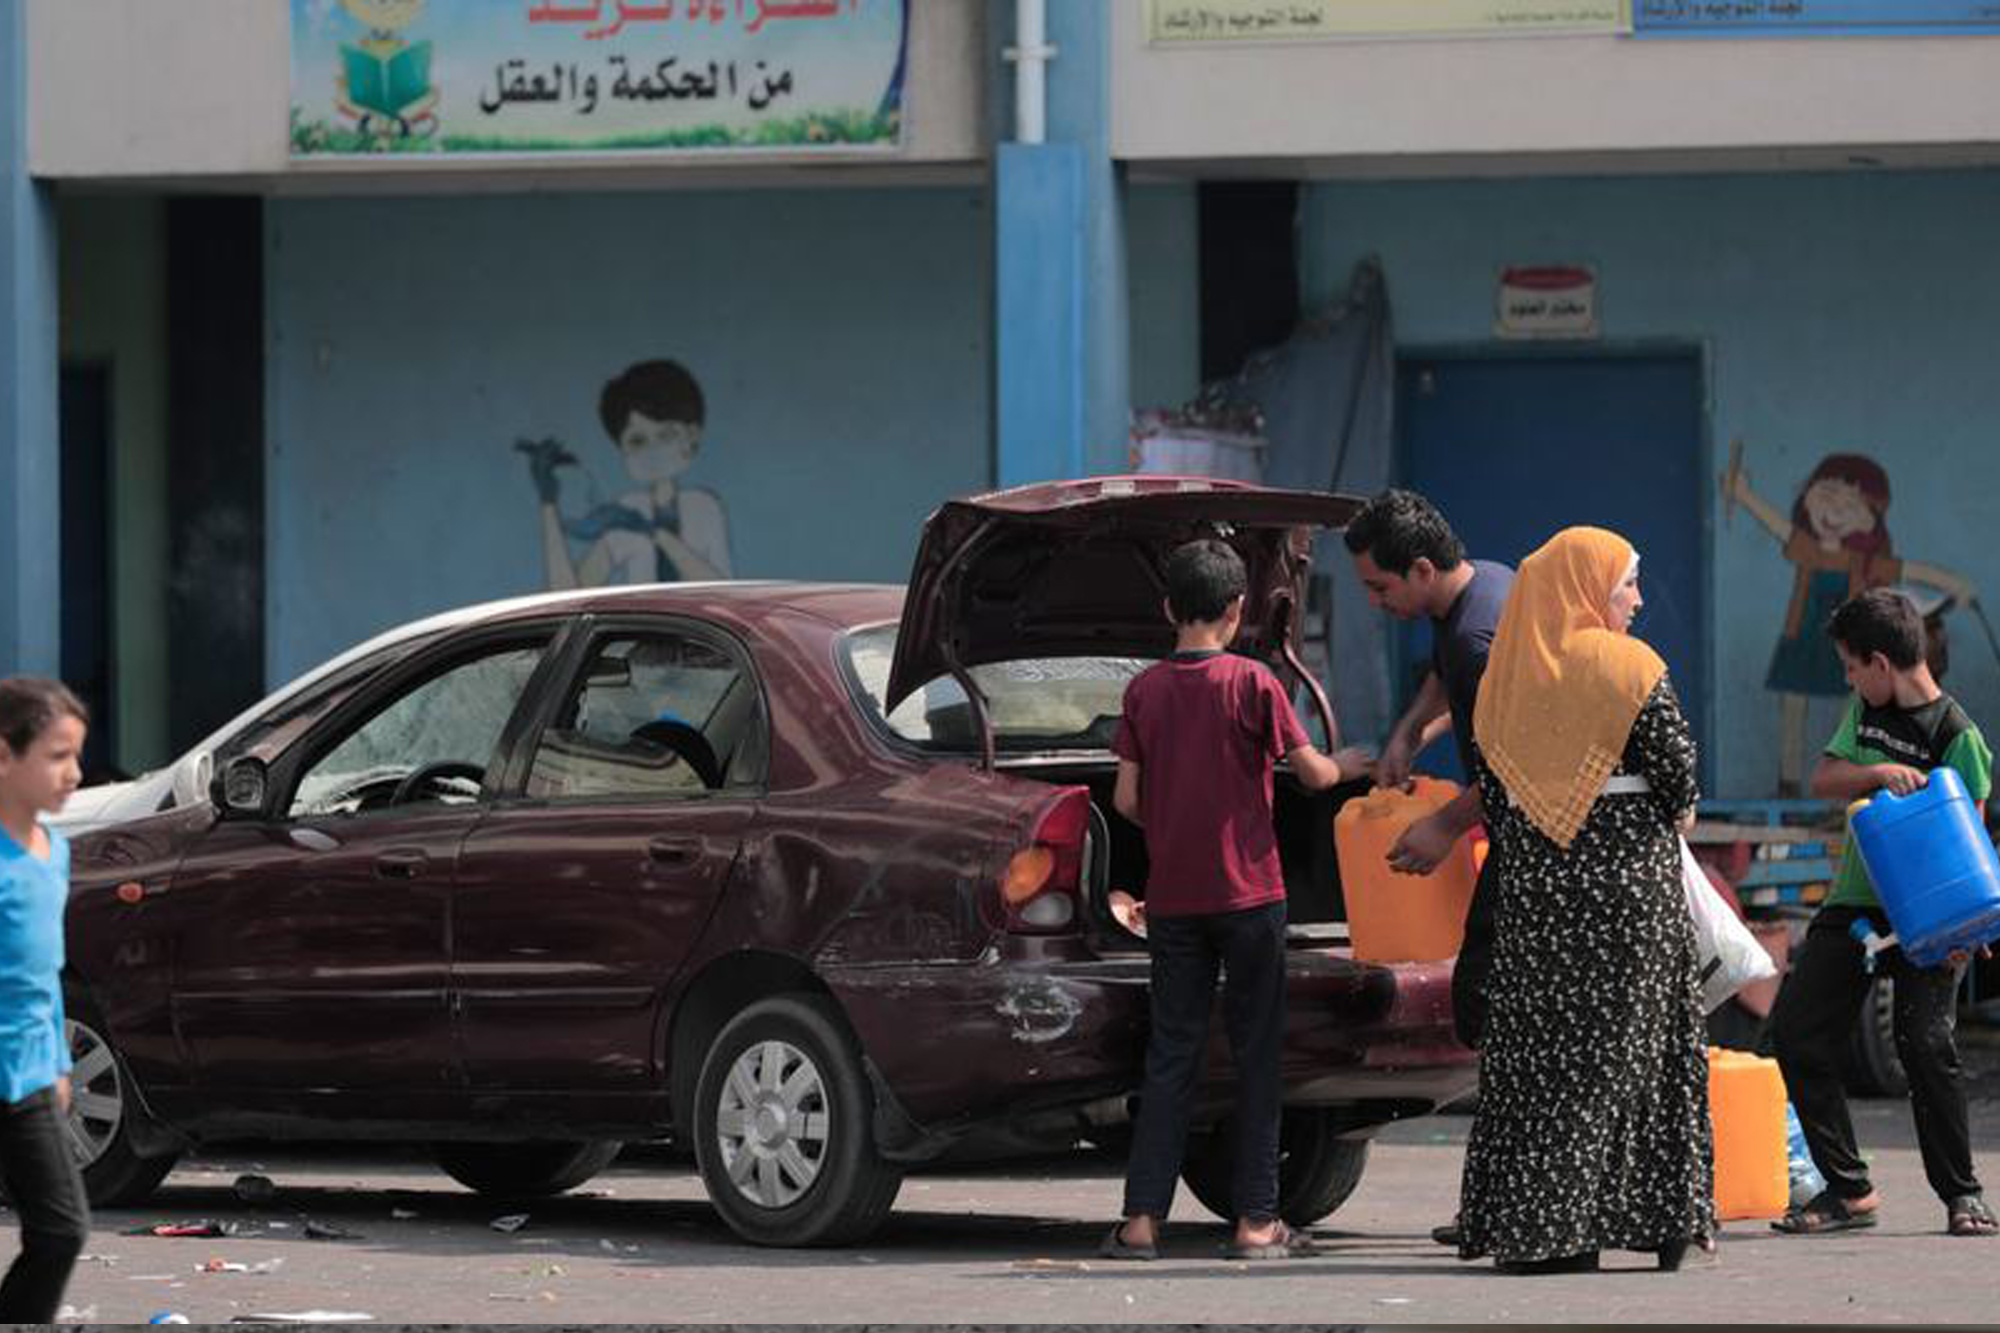 A palestinian family loading the trunk of the car.